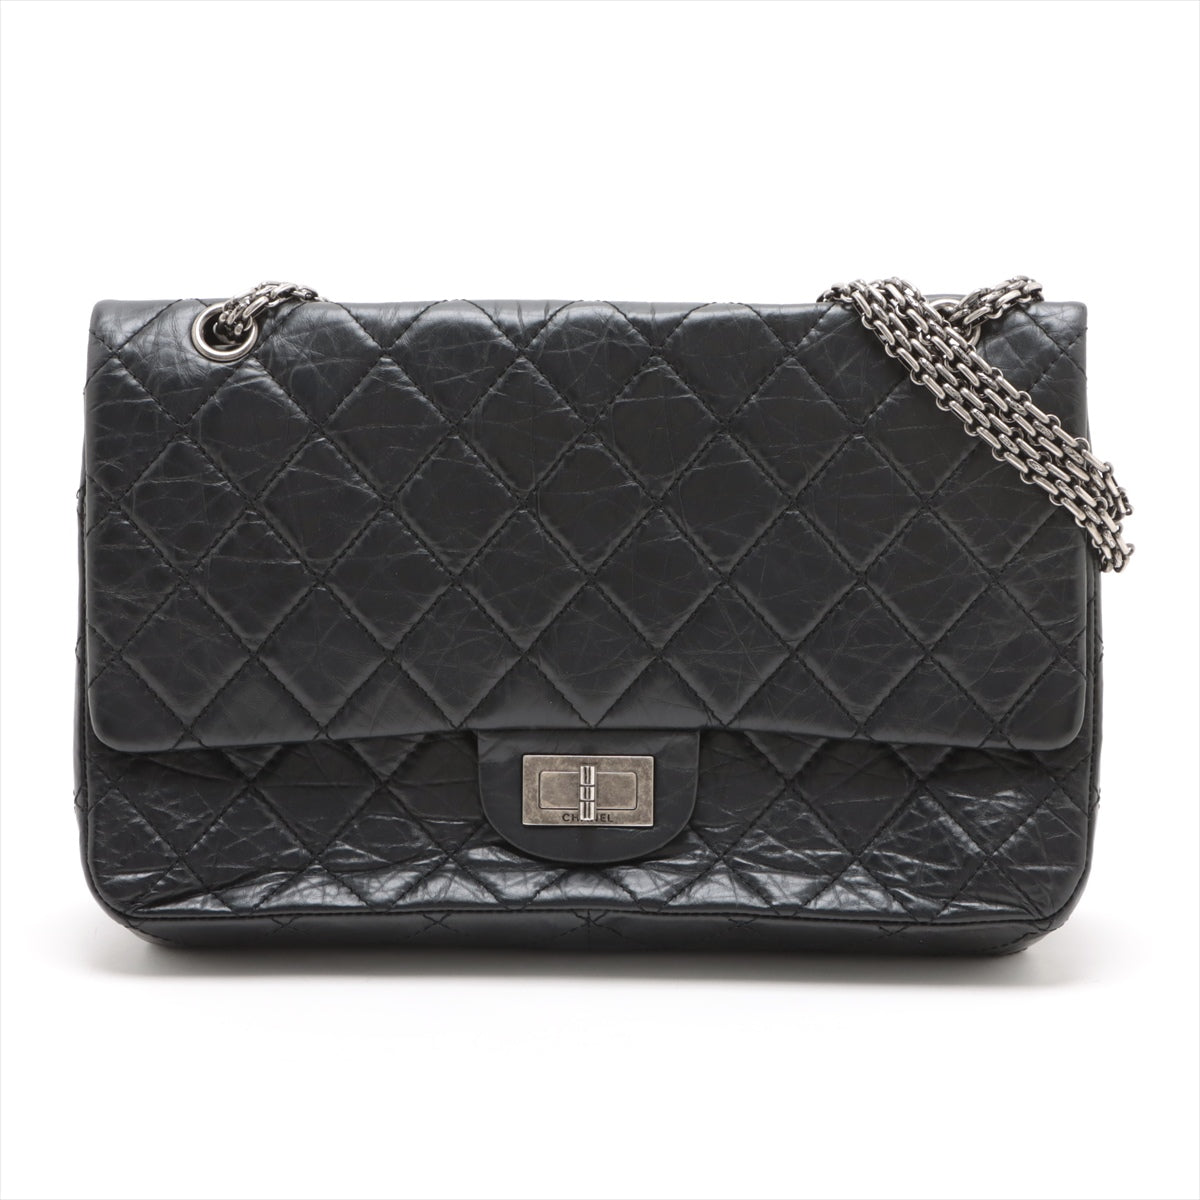 Chanel Women's Black Leather Classic Flap Bag in Black